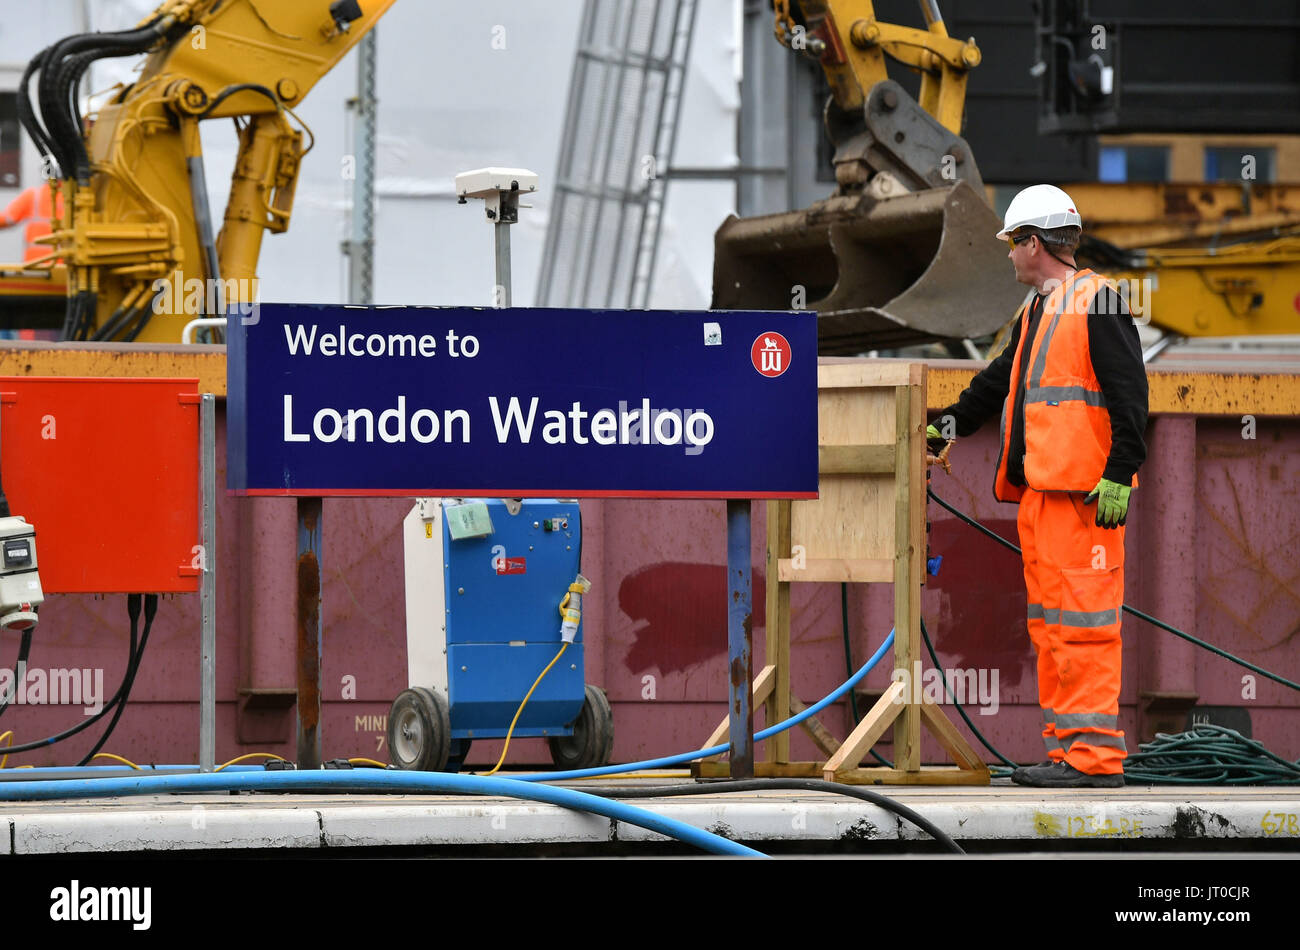 Engineering work is carried out at Waterloo Station in London in a major overhaul of the travel hub. Stock Photo